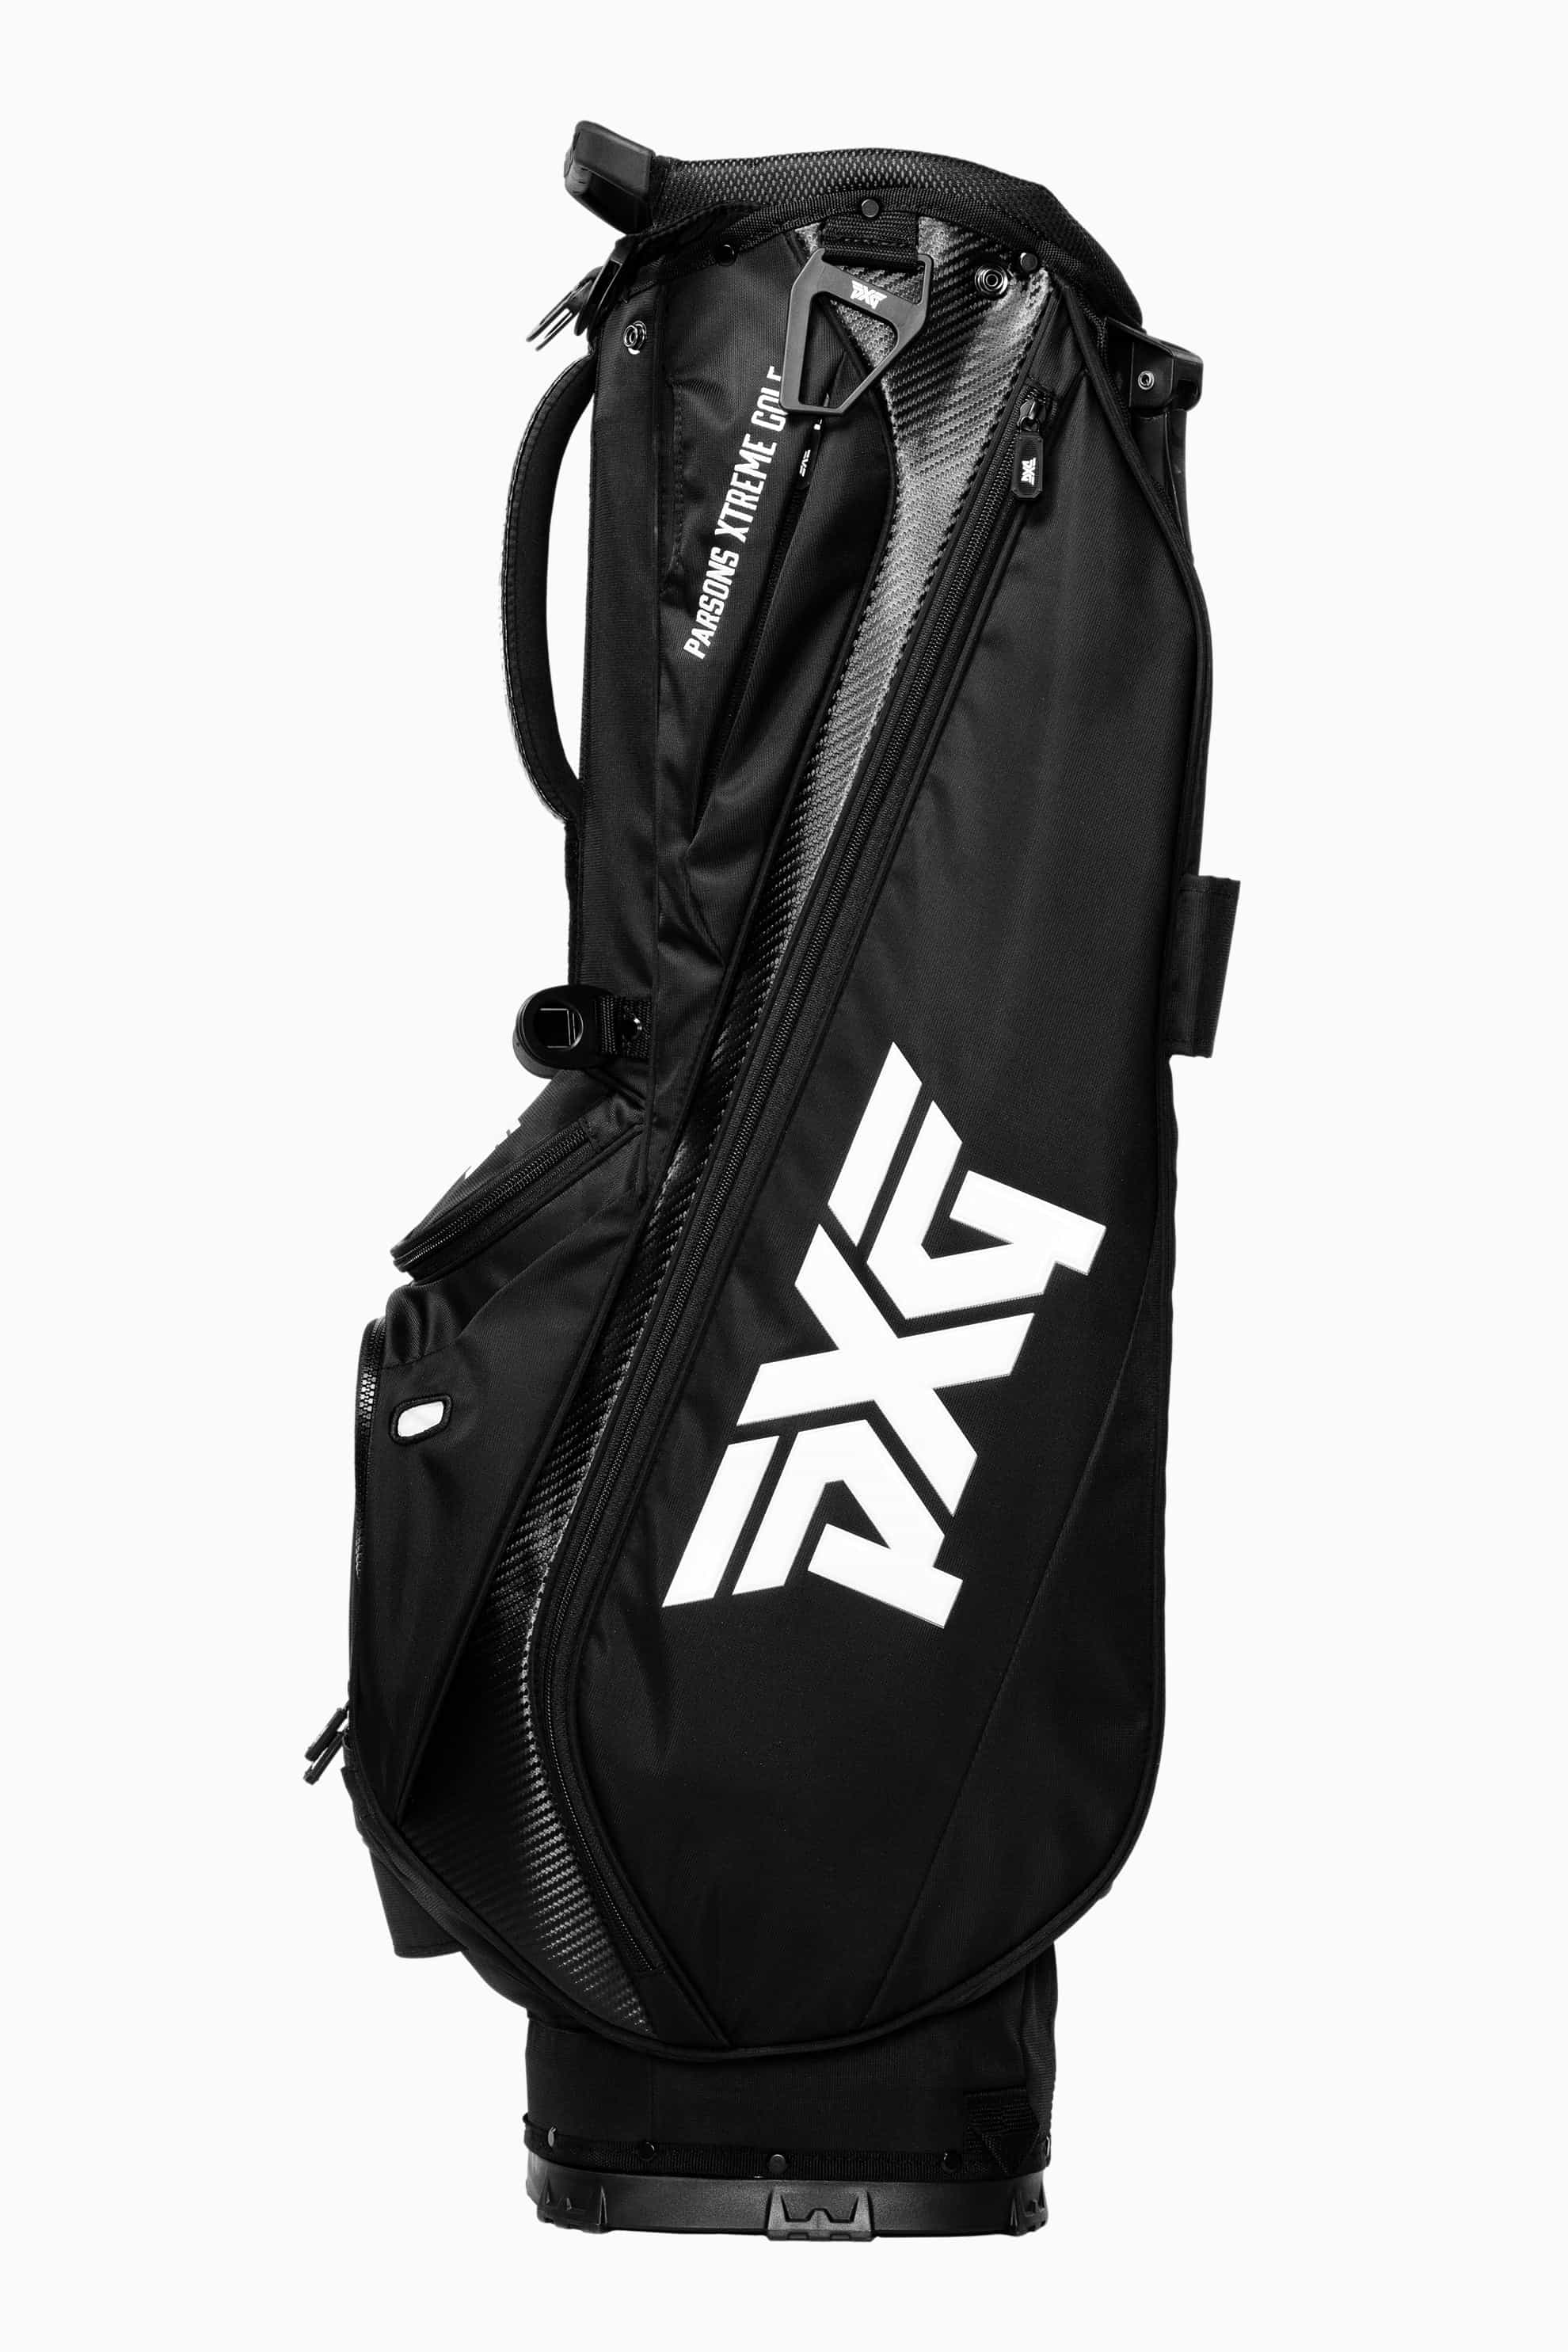 Do You Need A Waterproof Golf Bag? — (and Is It Bad to Get It Wet?)